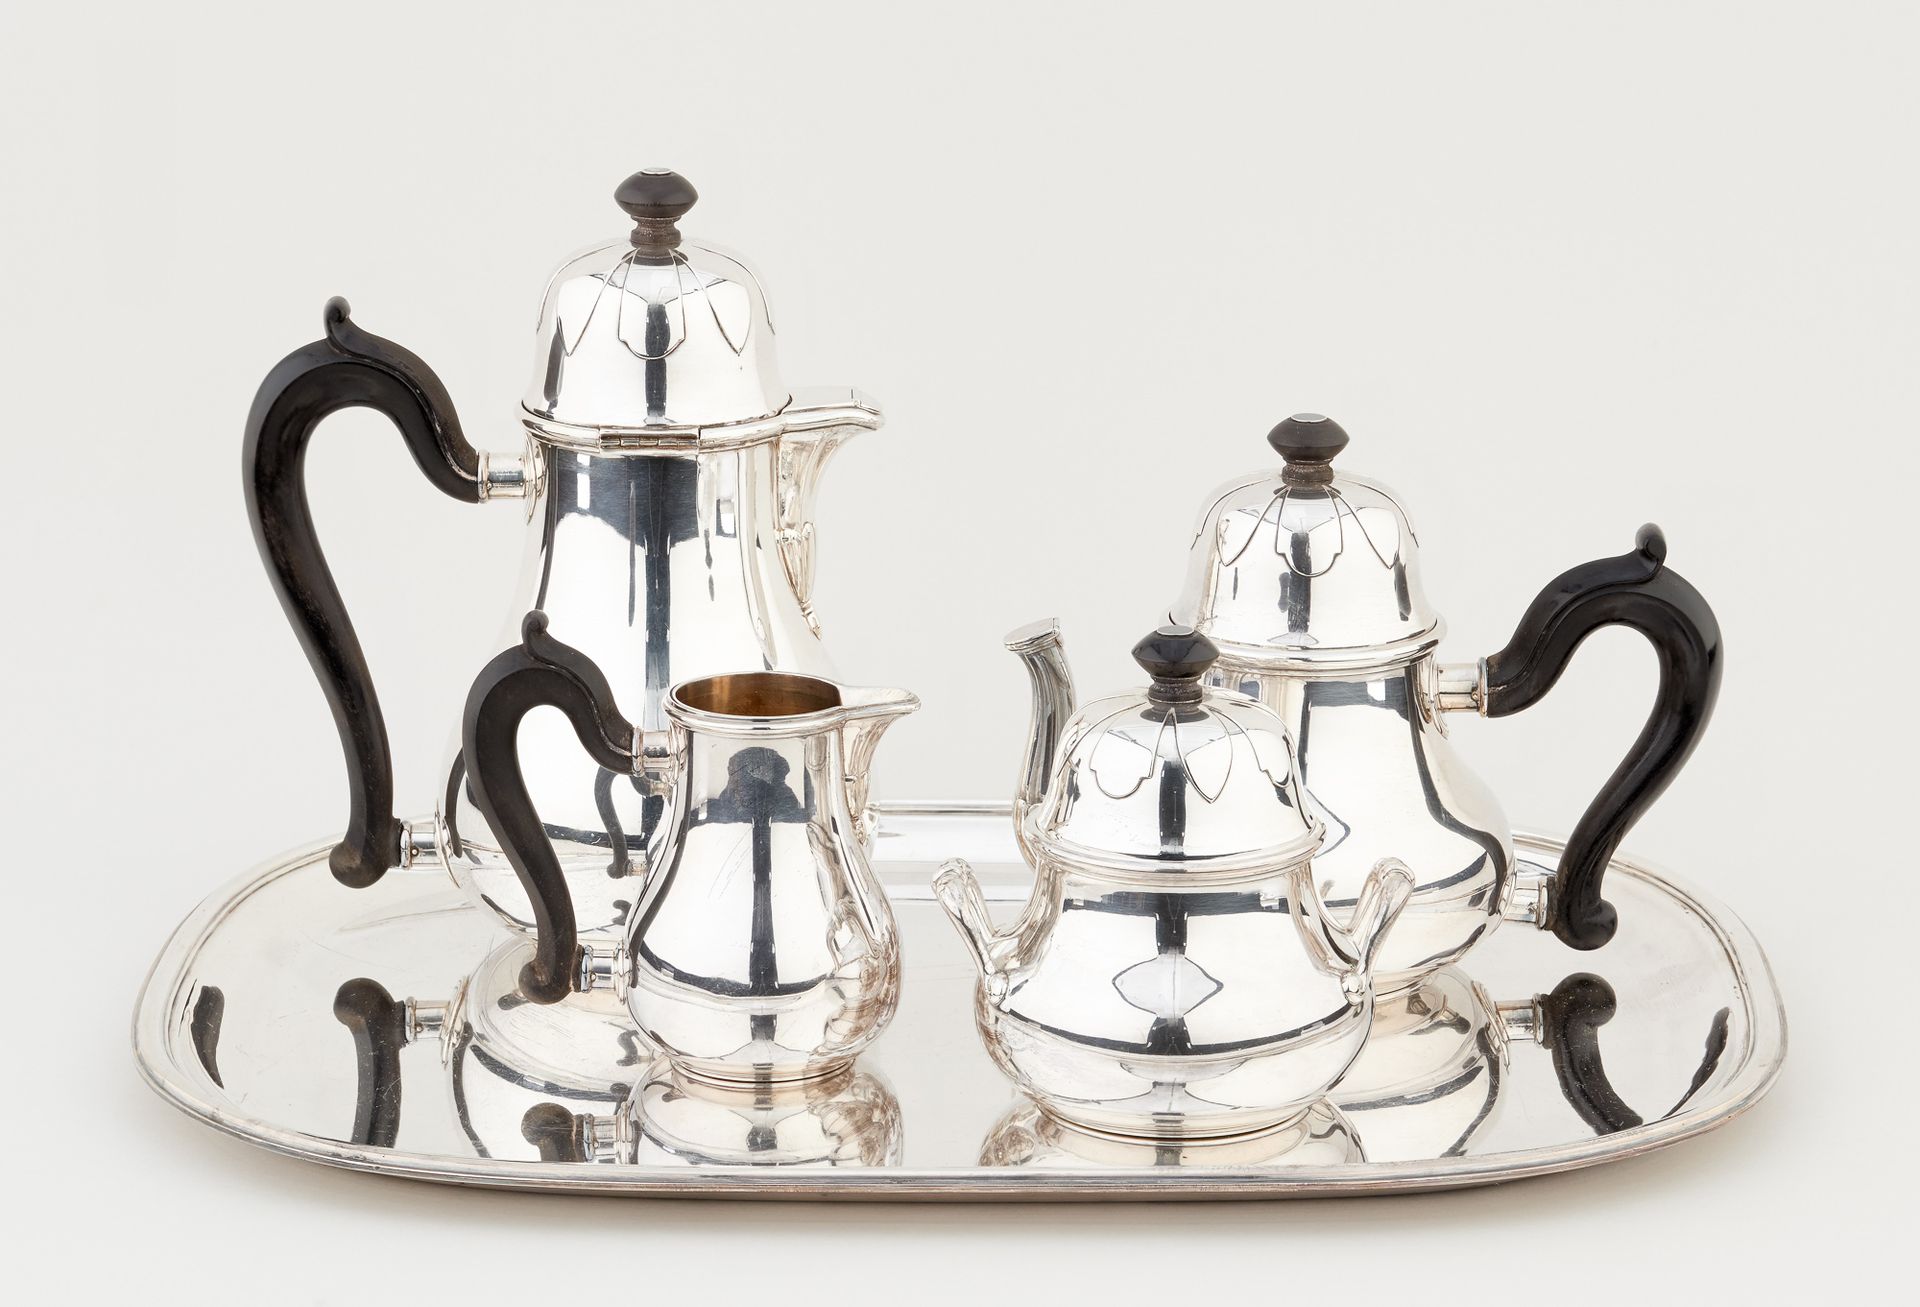 R. Ruys. Silverware: Silver coffee and tea set, consisting of a coffee pot, a te&hellip;